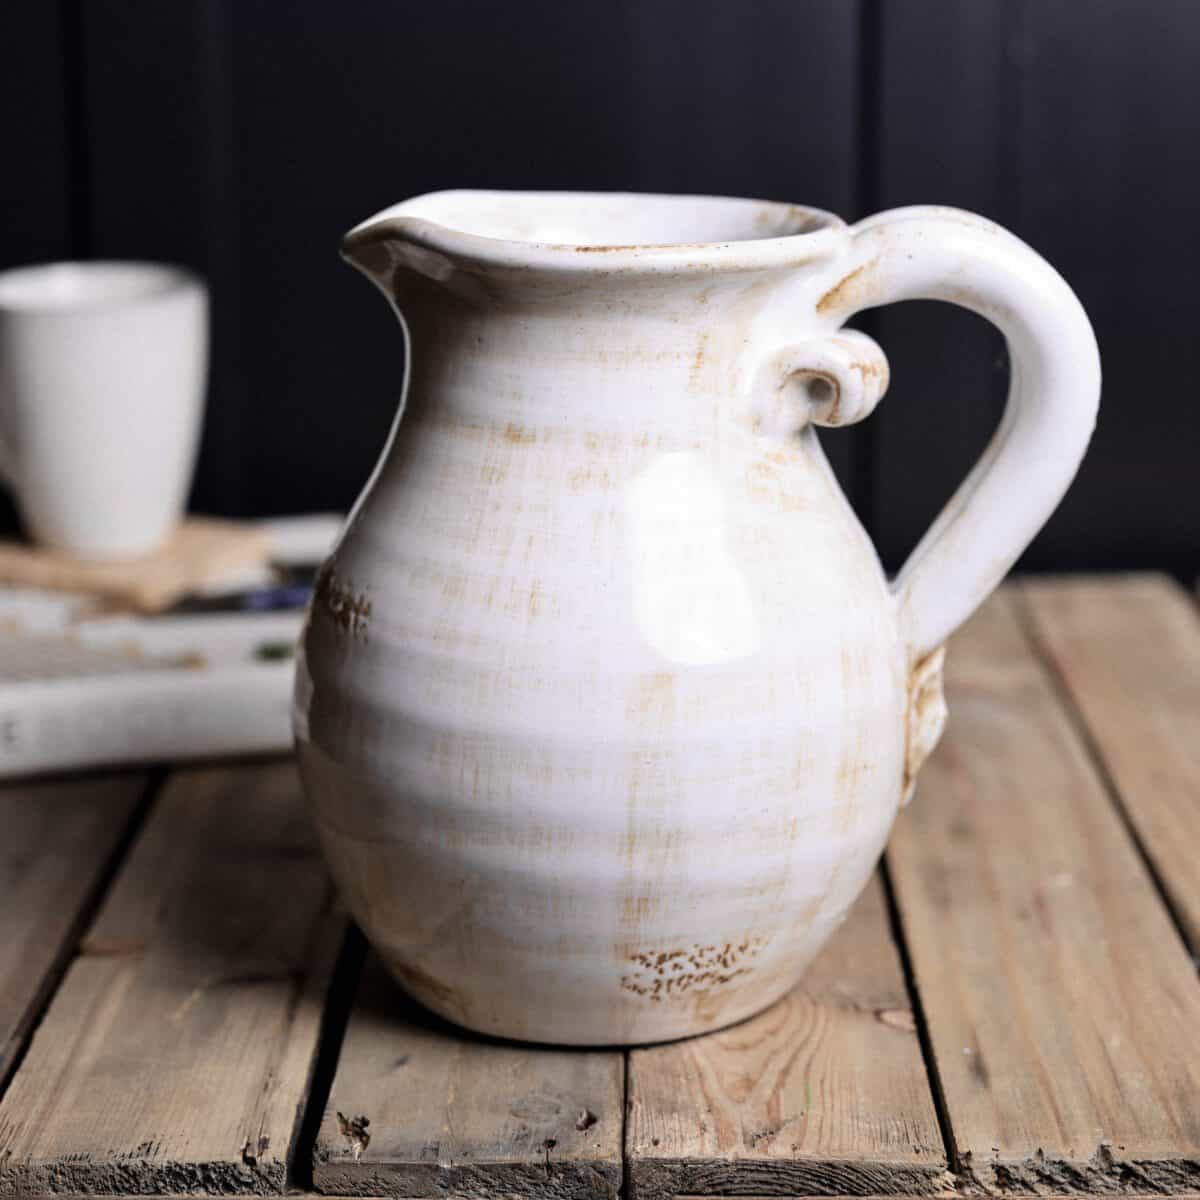 Off white jug with handle on wooden table.